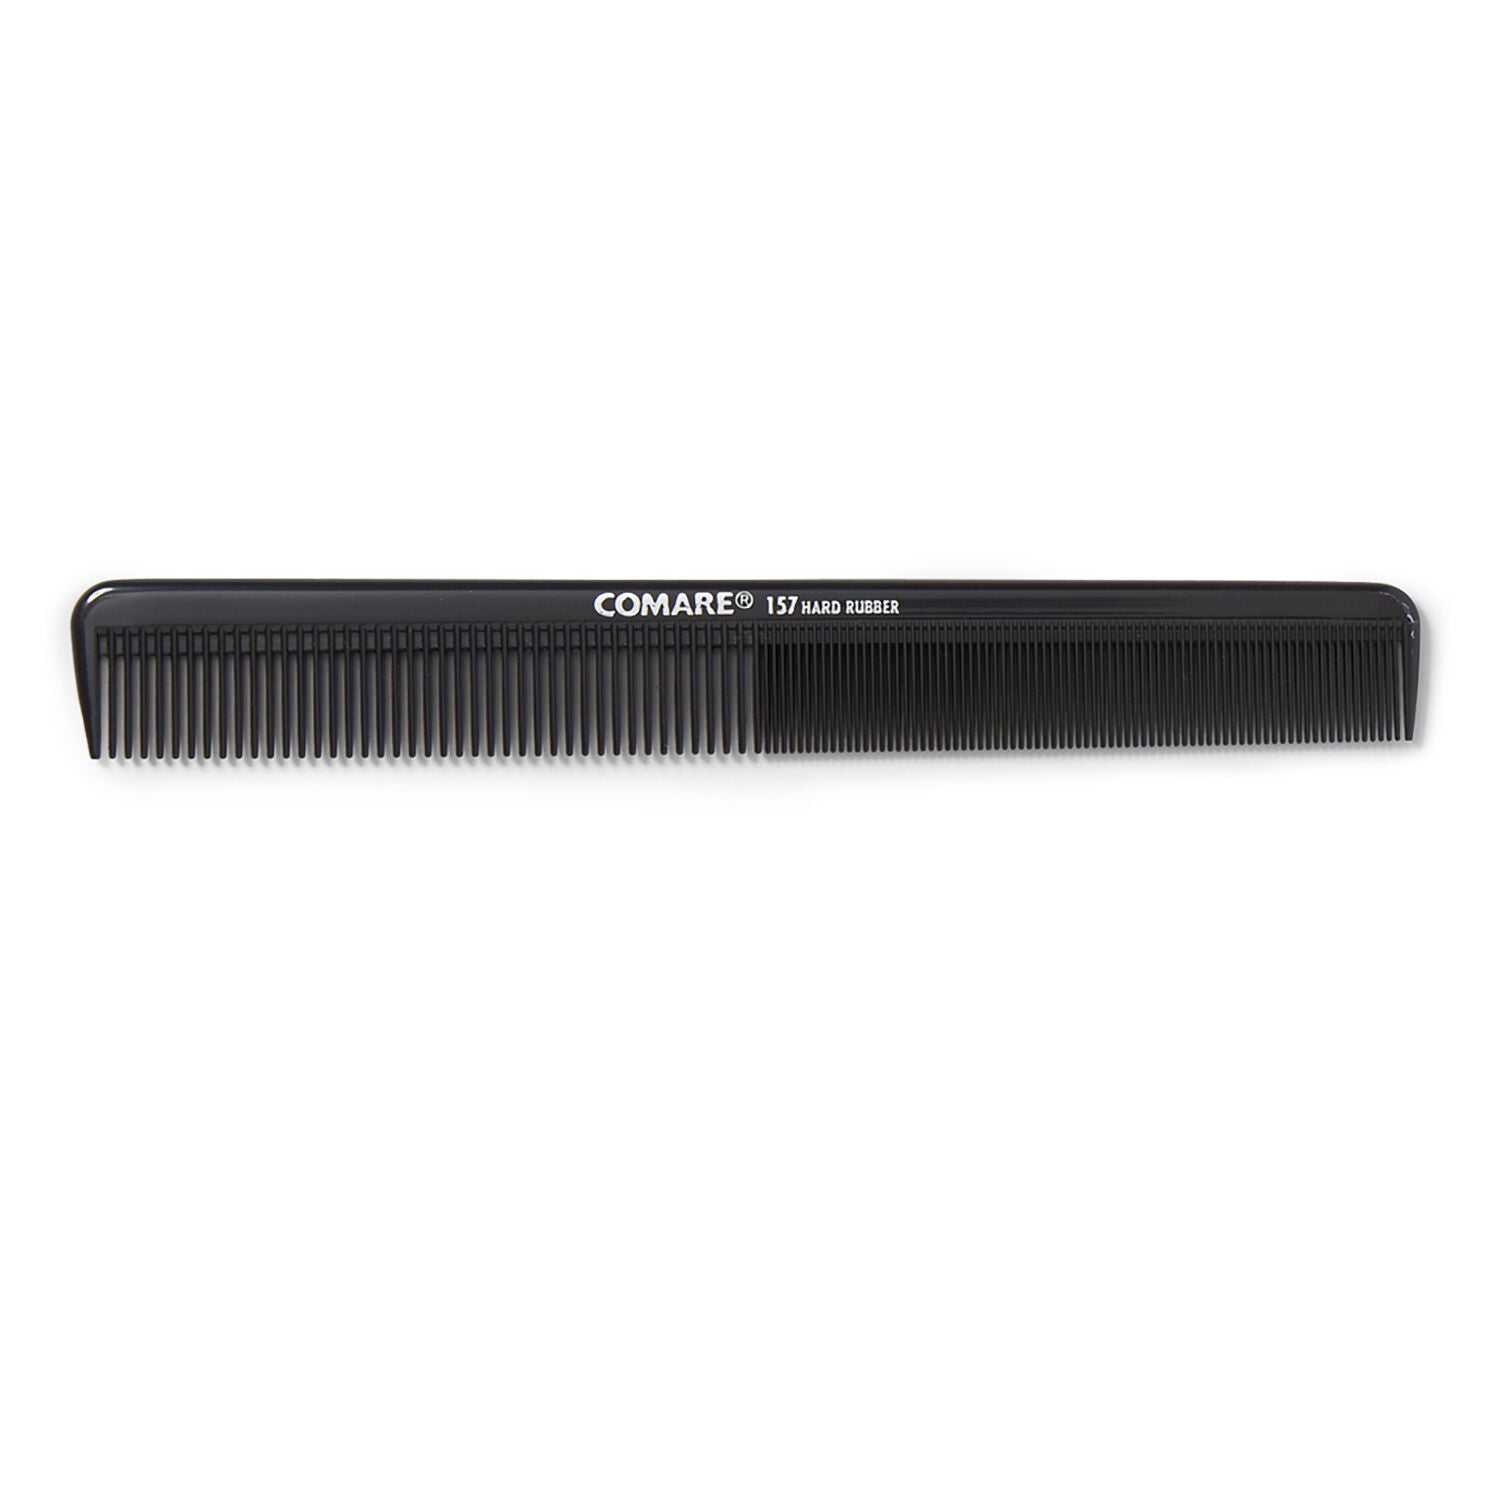 Comare Hard Rubber Styling Comb